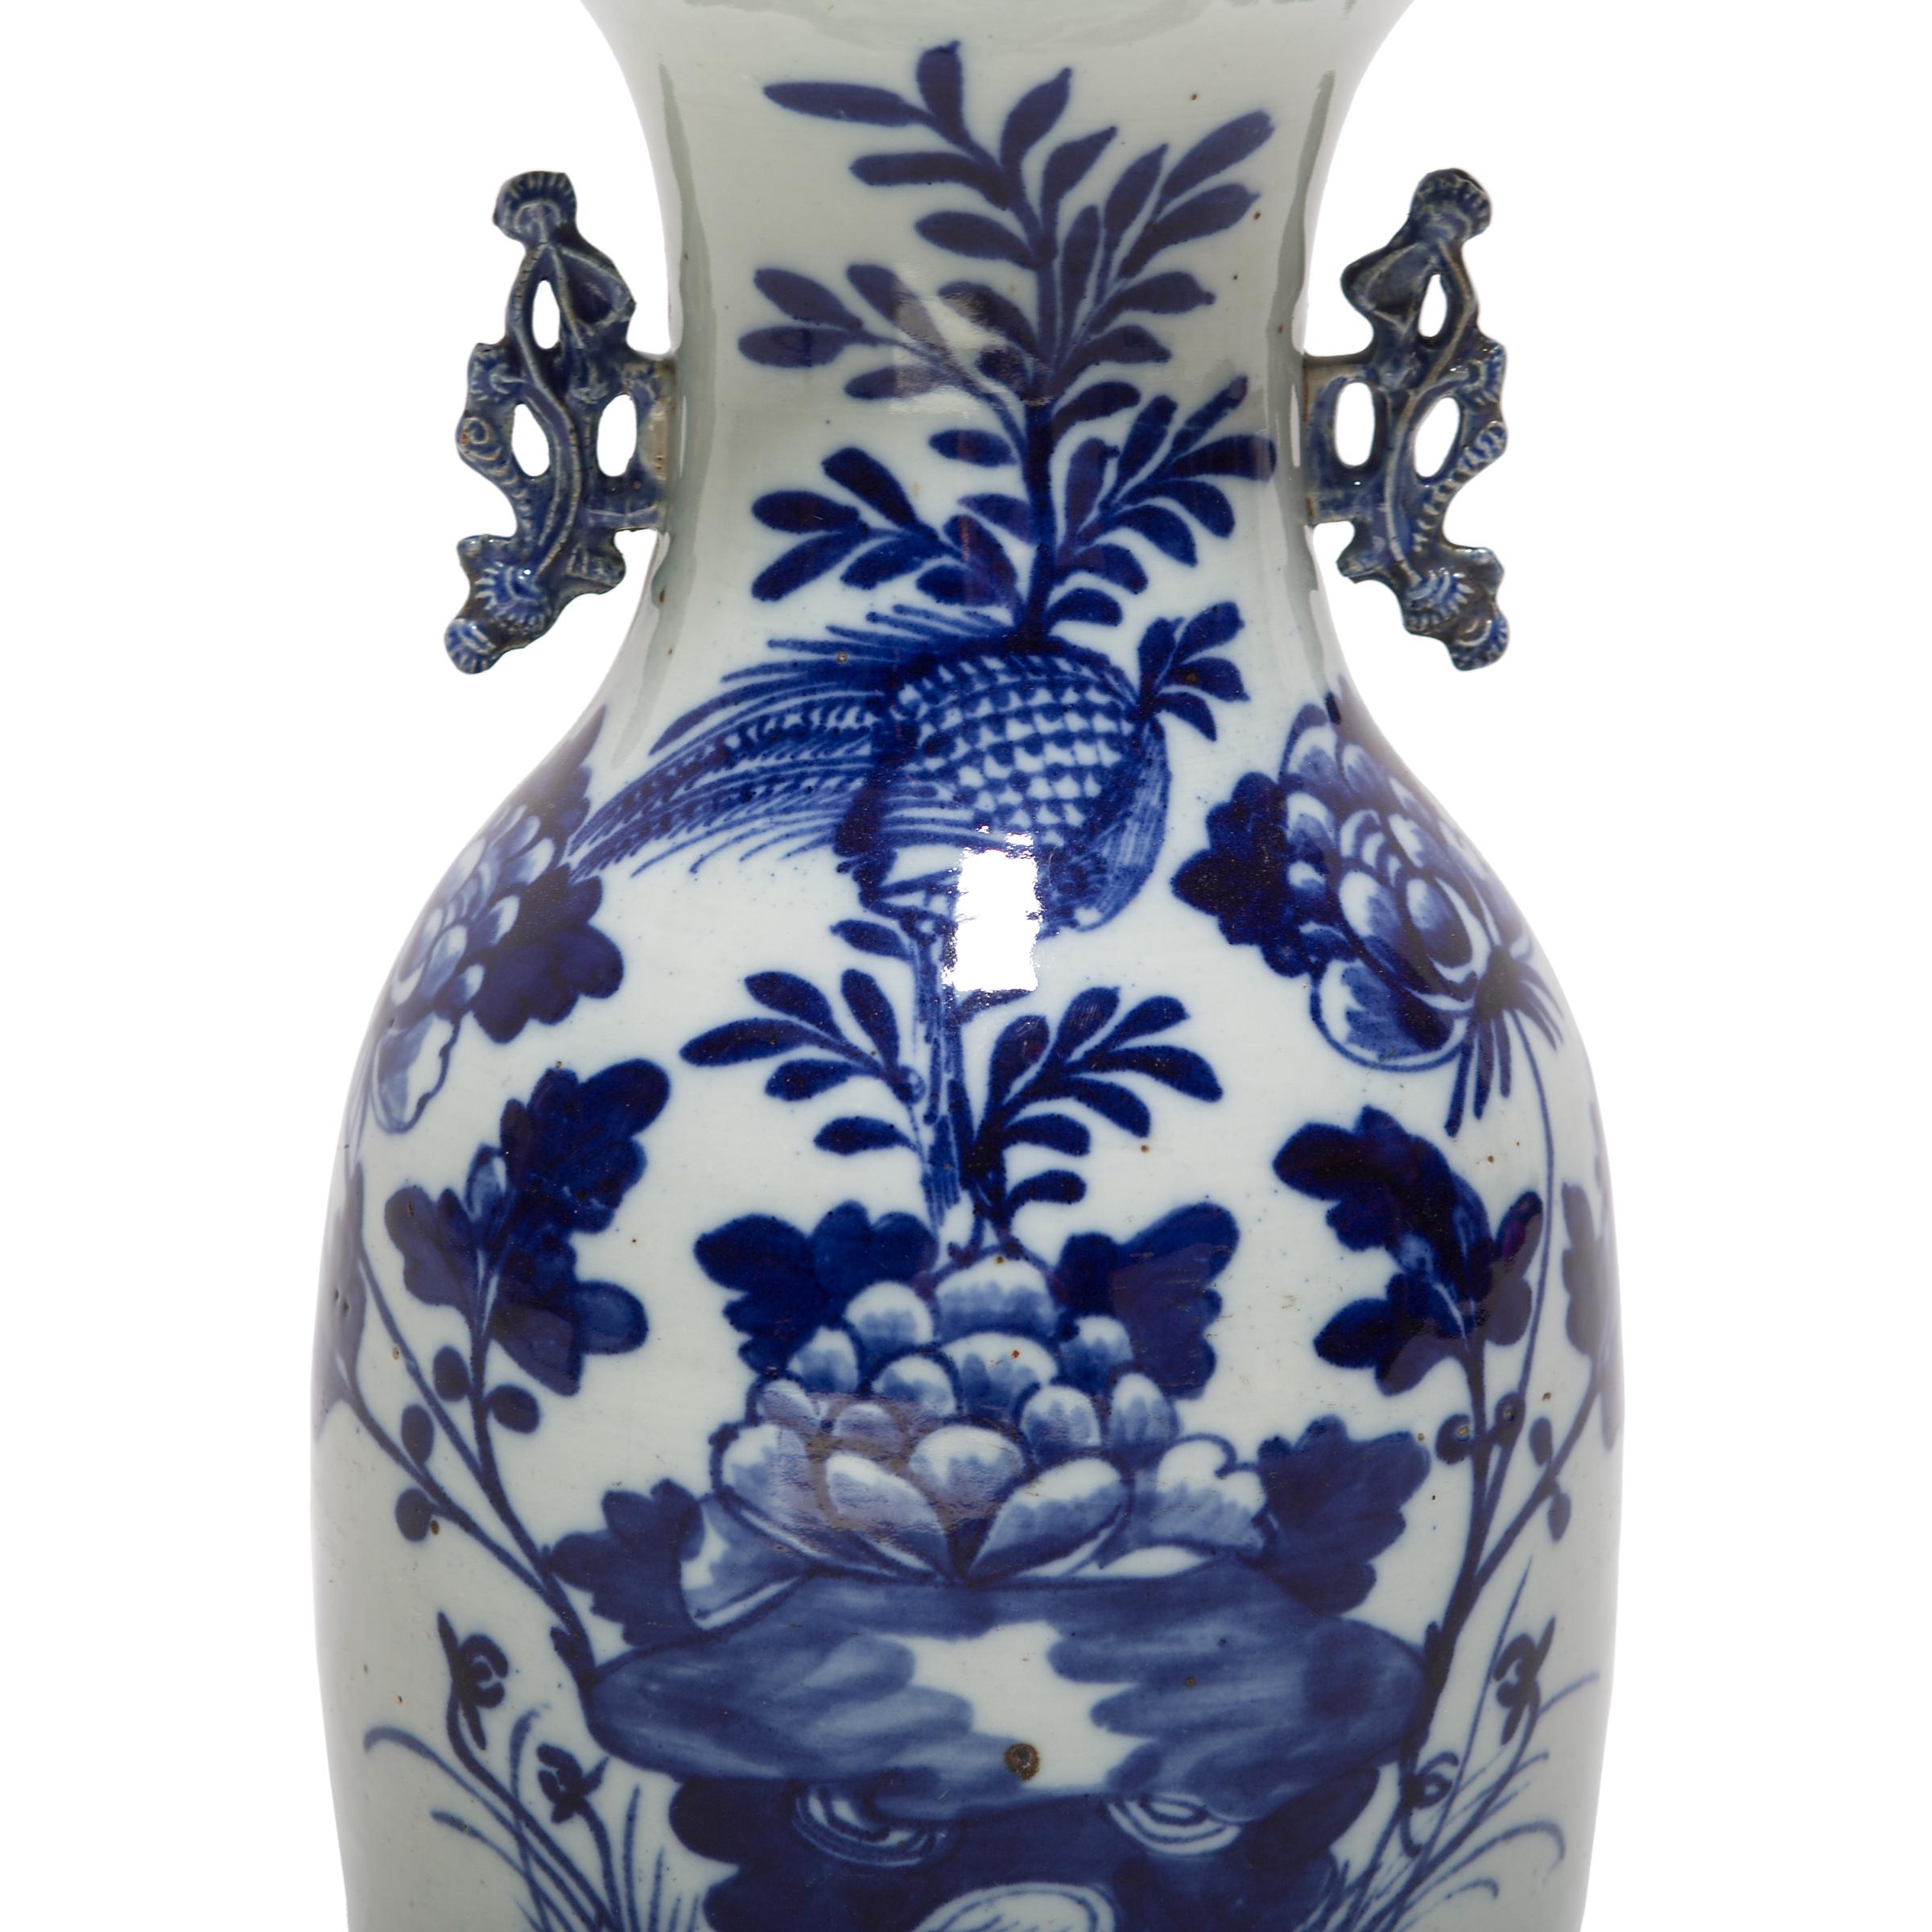 Porcelain Pair of Chinese Blue and White Fantail Vases with Pheasants and Peonies, c. 1850